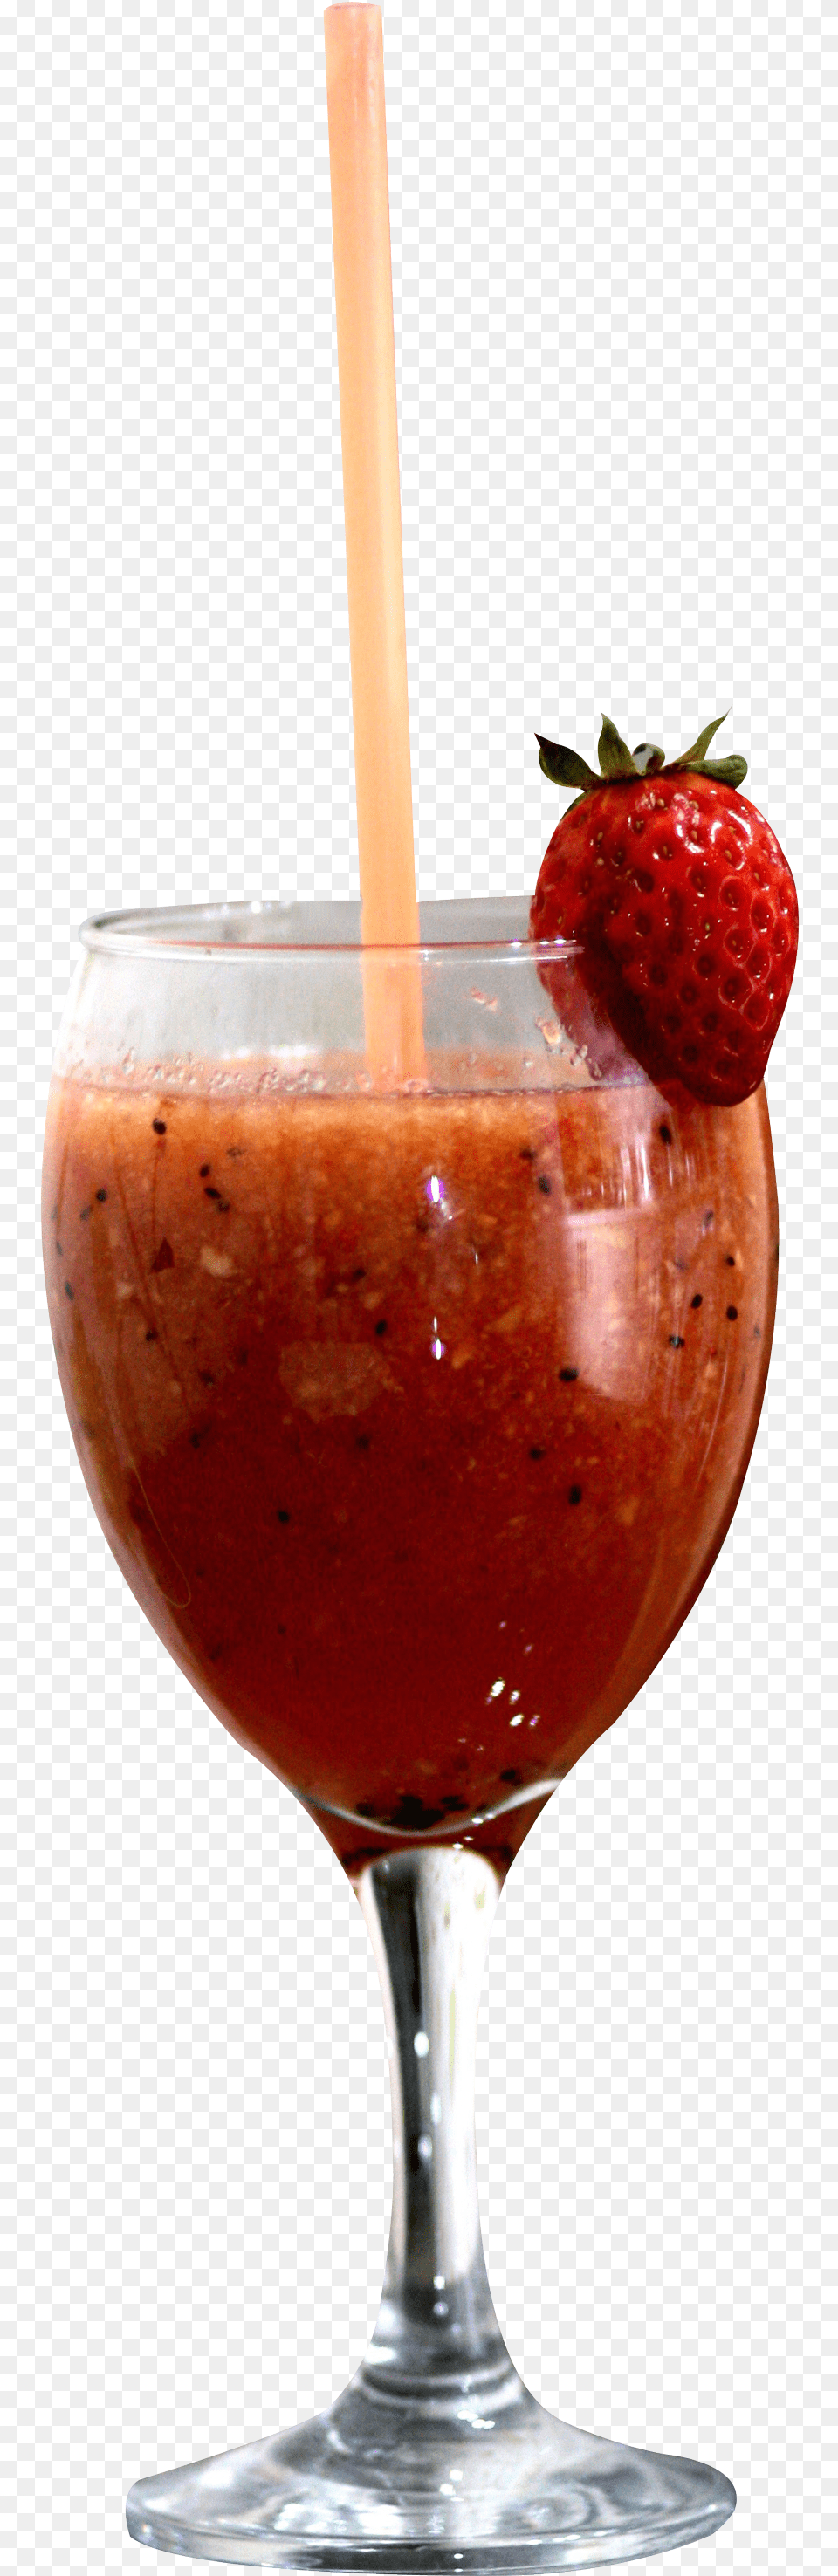 Cocktail Image Transparent Cocktail, Strawberry, Berry, Beverage, Produce Free Png